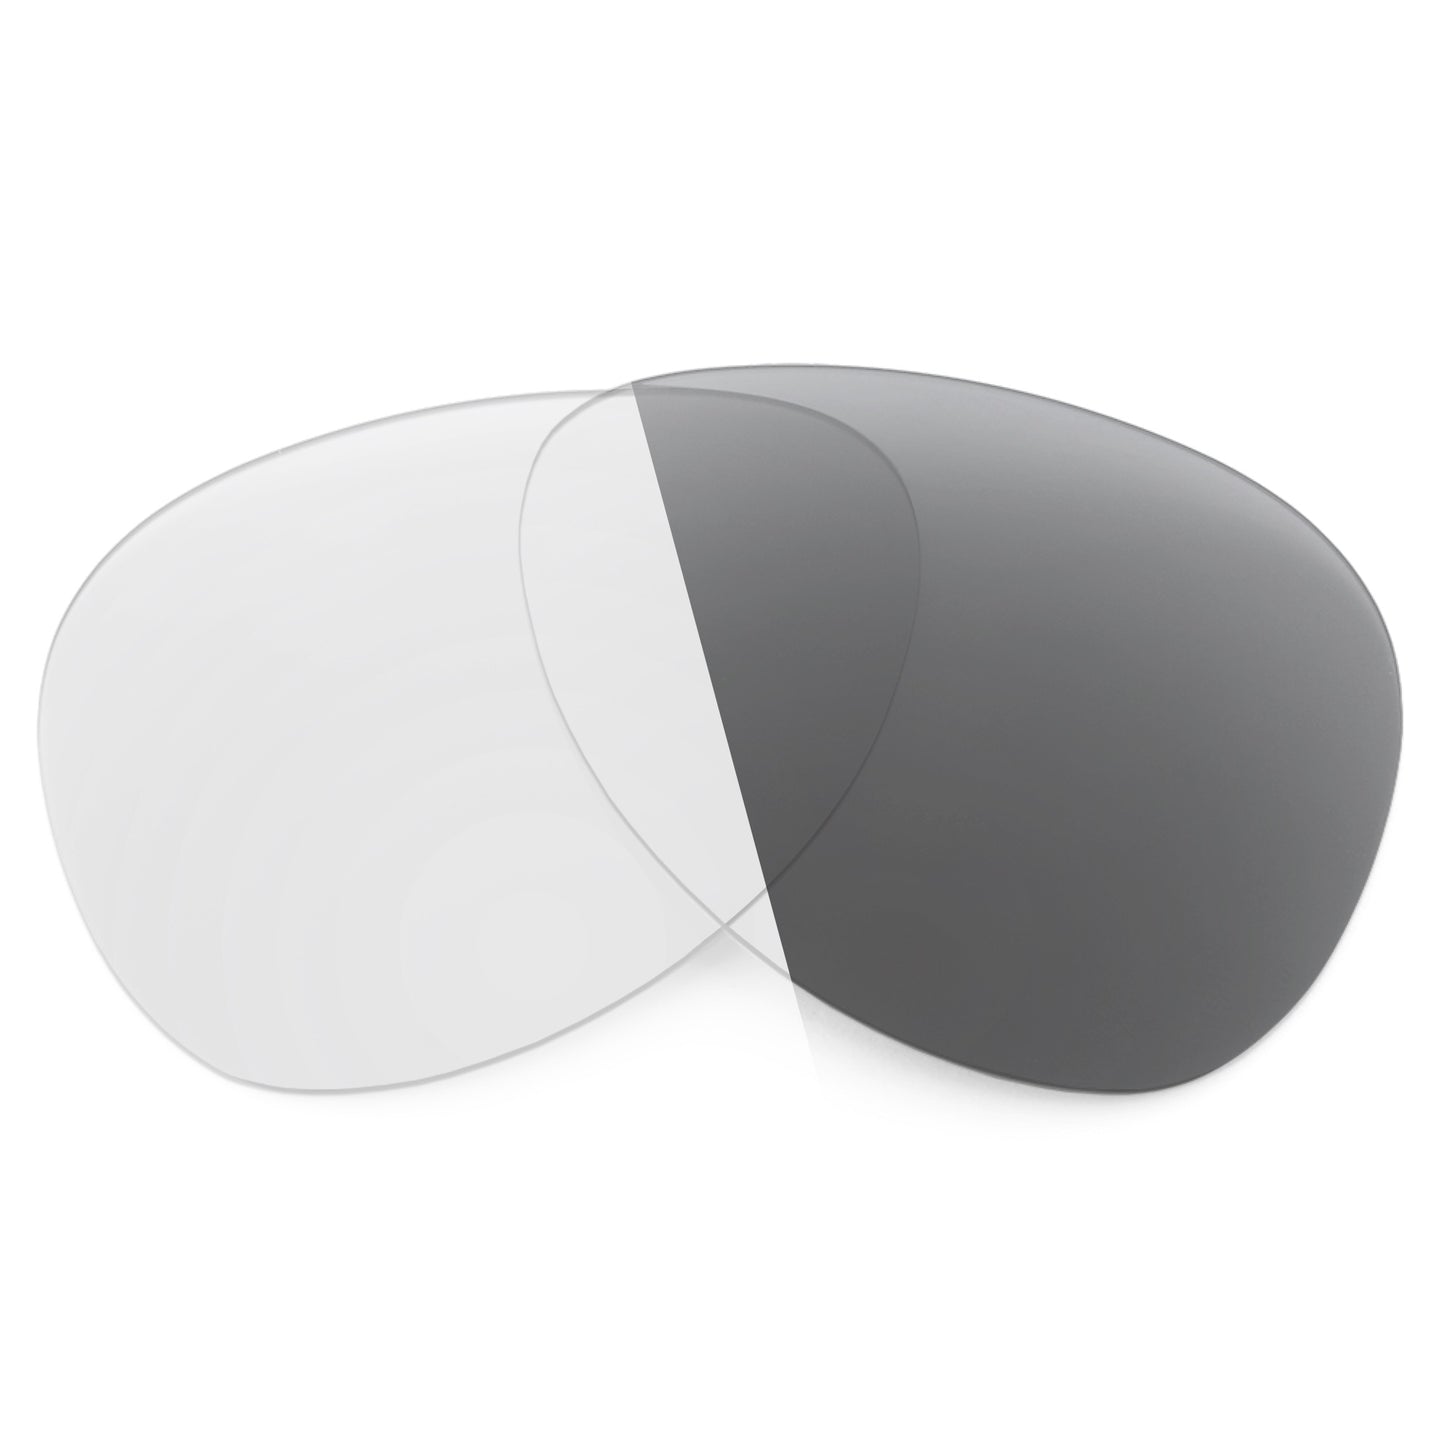 Revant replacement lenses for Ray-Ban RB3519 62mm Non-Polarized Adapt Gray Photochromic